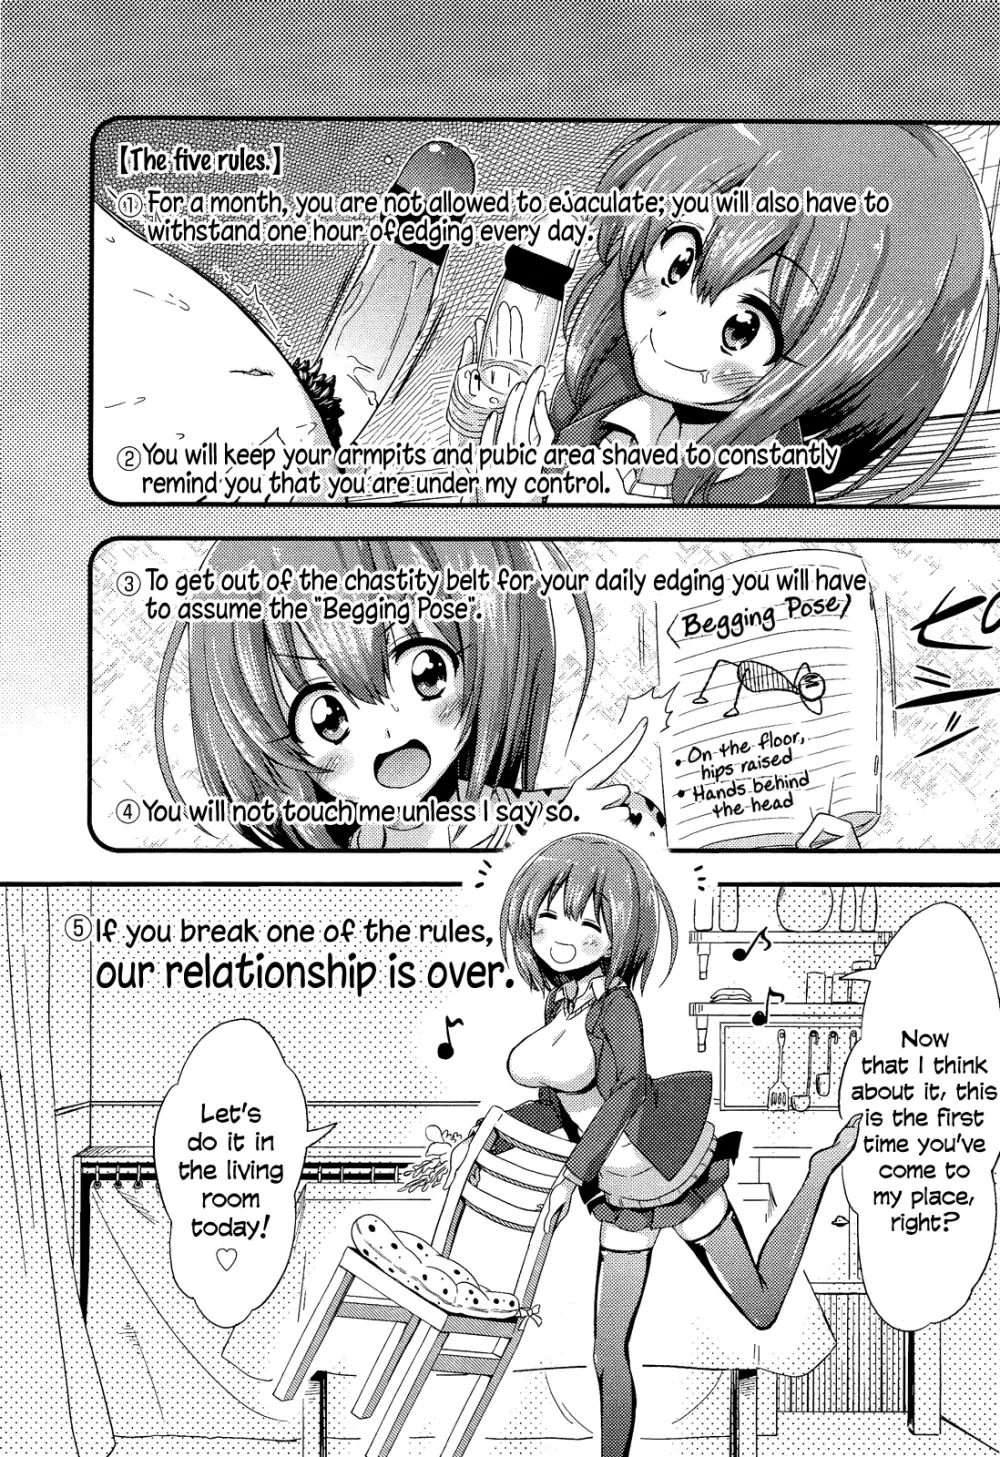 GIRL FOR M - CHAPTERS (VOL1 - 8 ) (ENGLISH) part n°1 Page.54